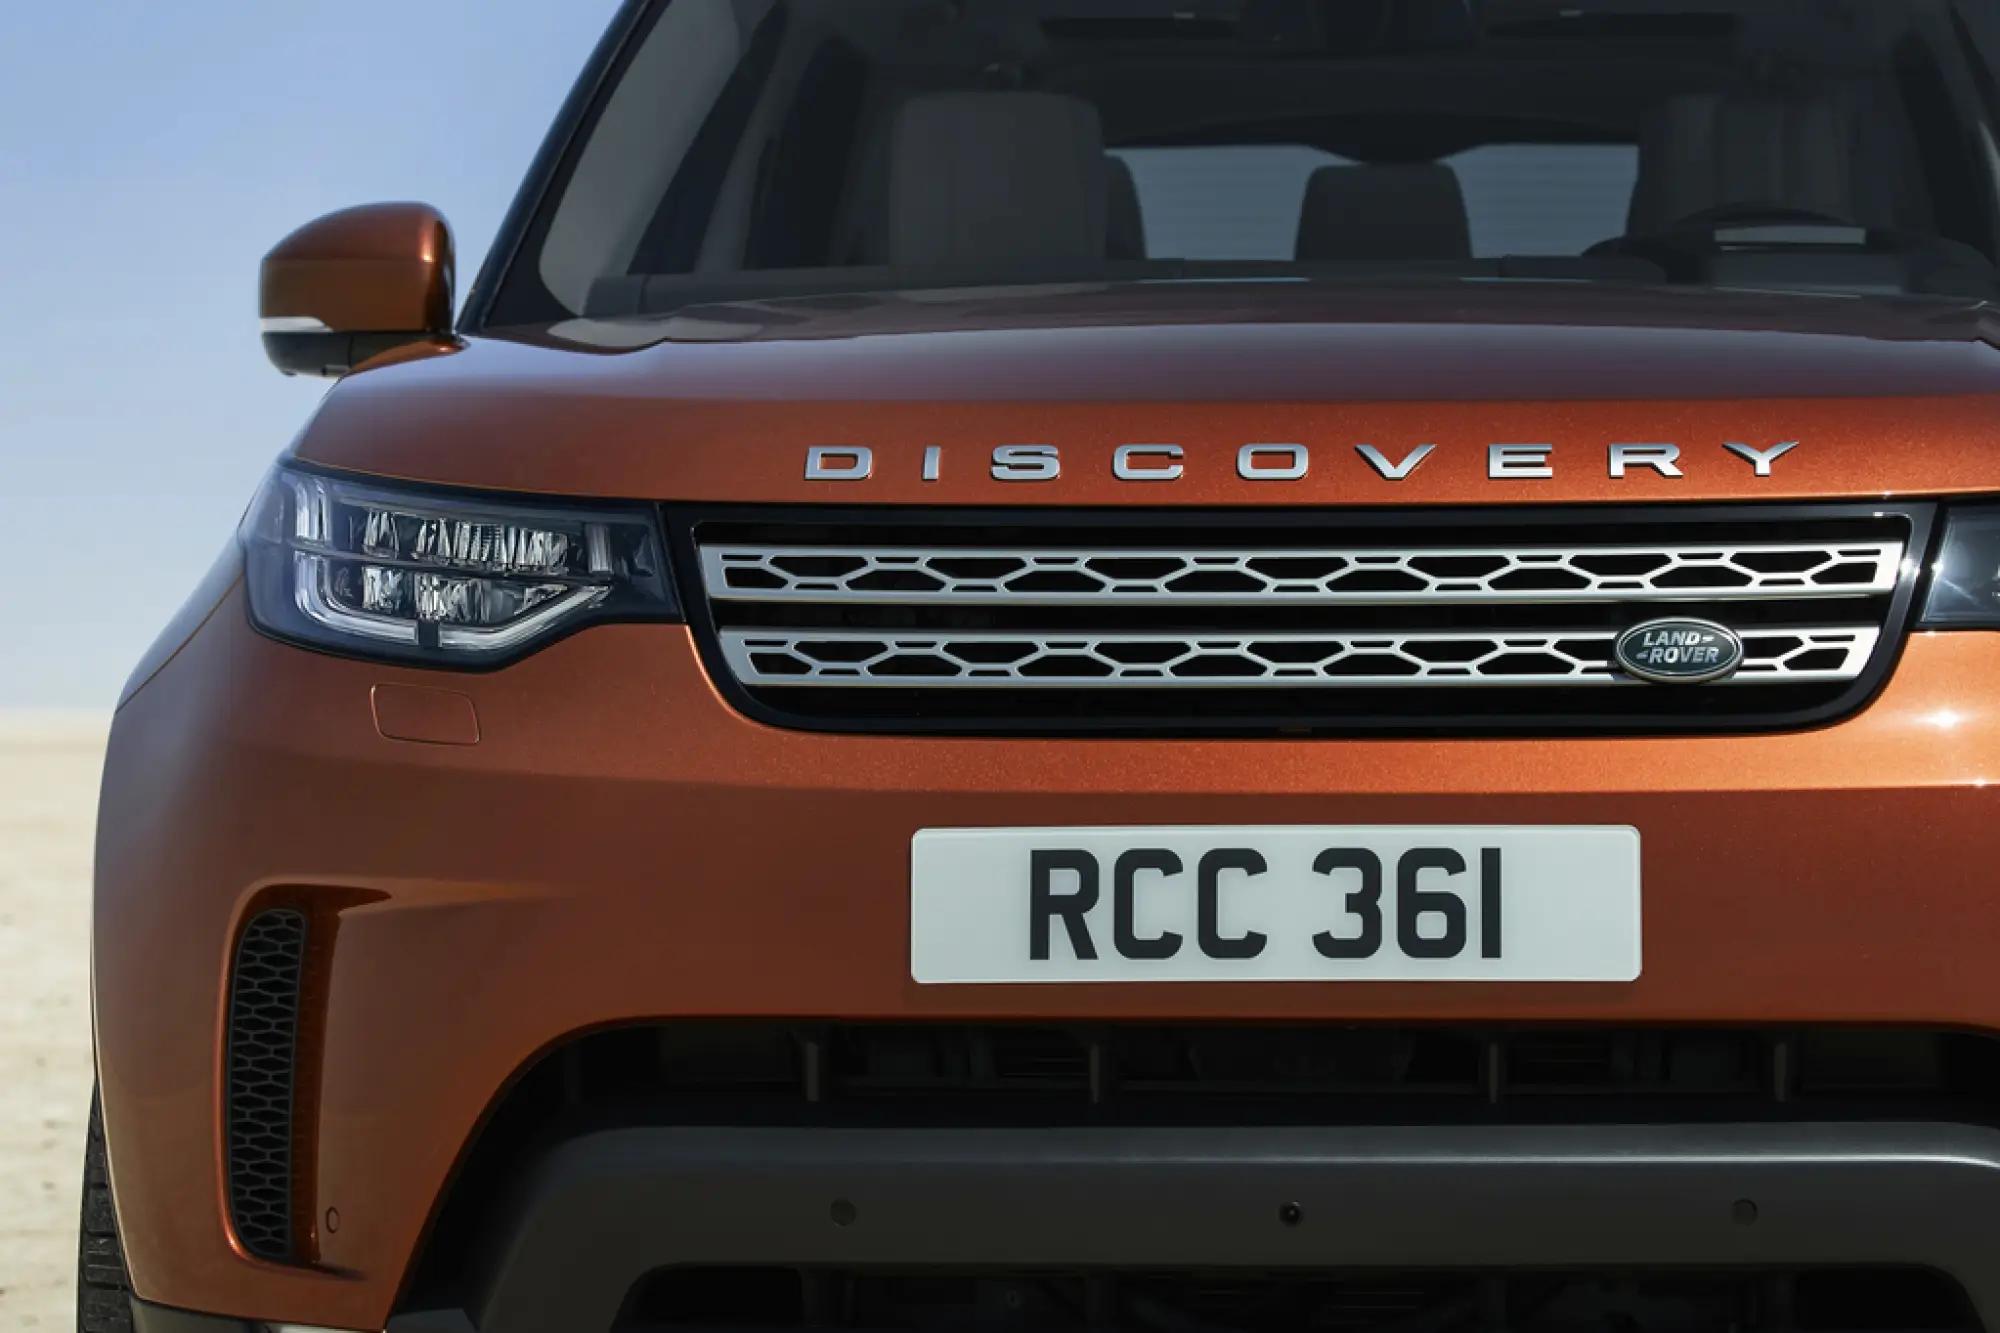 Foto stampa nuova Land Rover Discovery MY 2017 28 settembre 2016 - 40